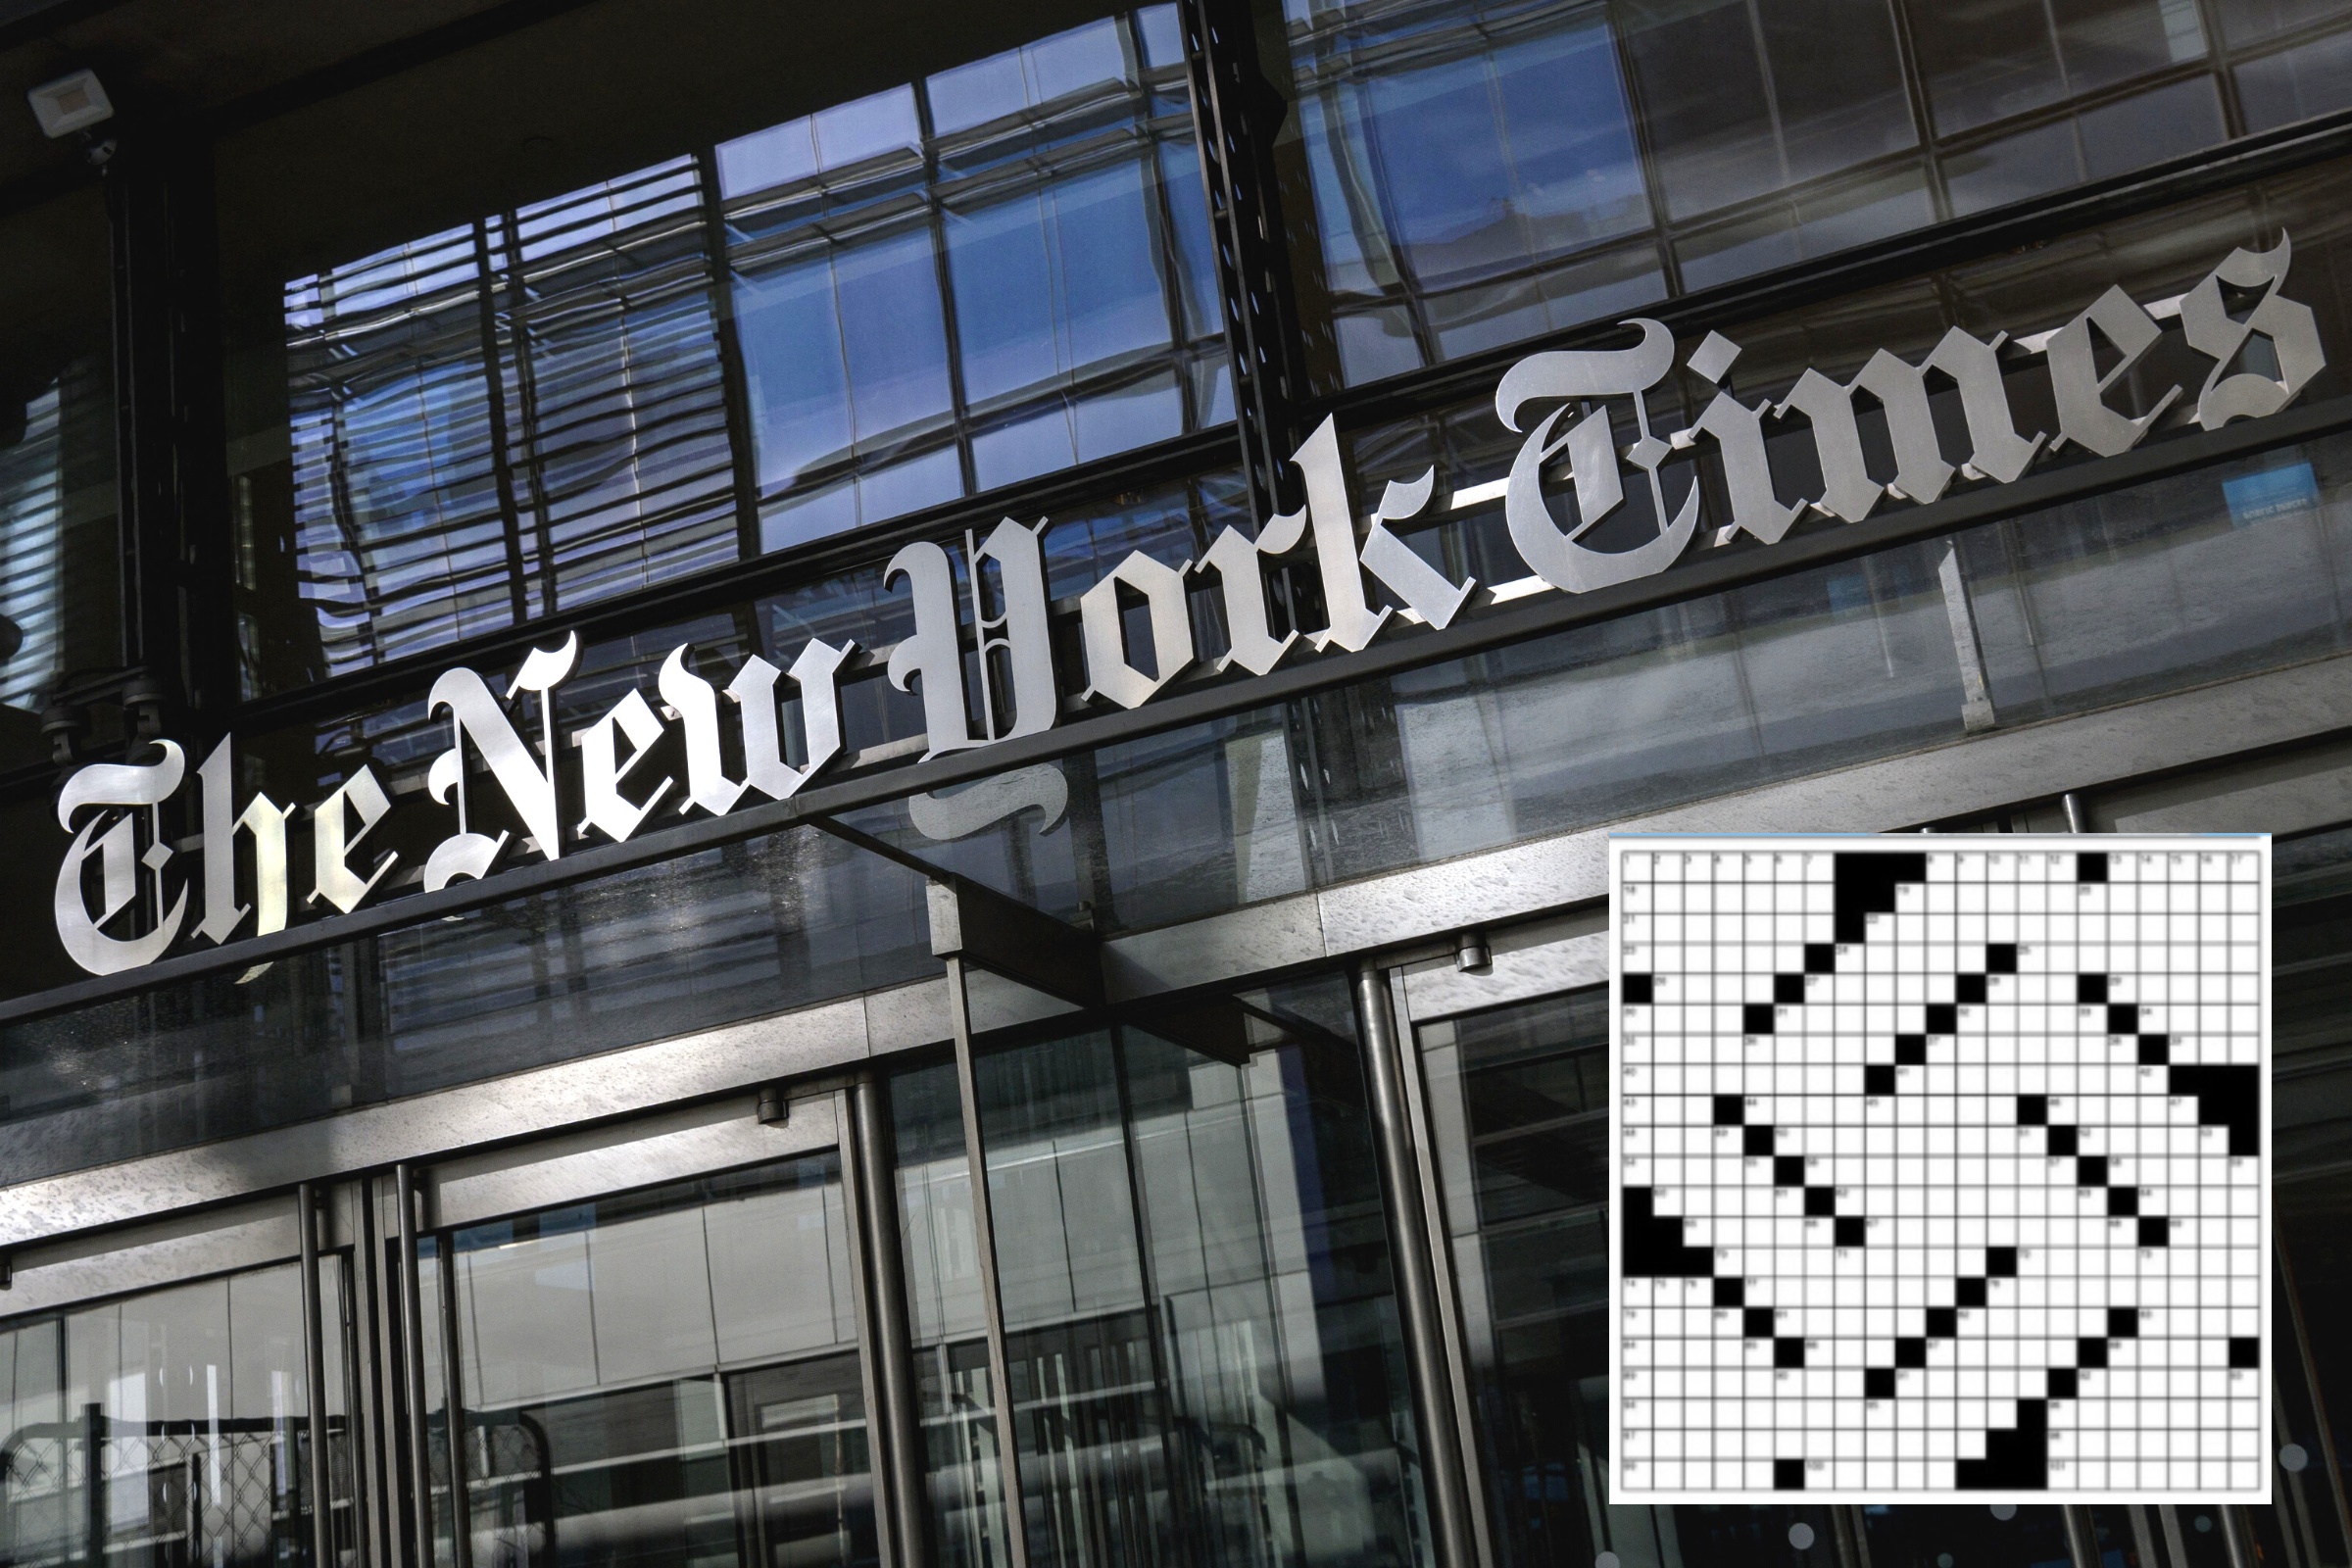 NYT Response to Prior Crossword Swastika Accusations Resurfaces